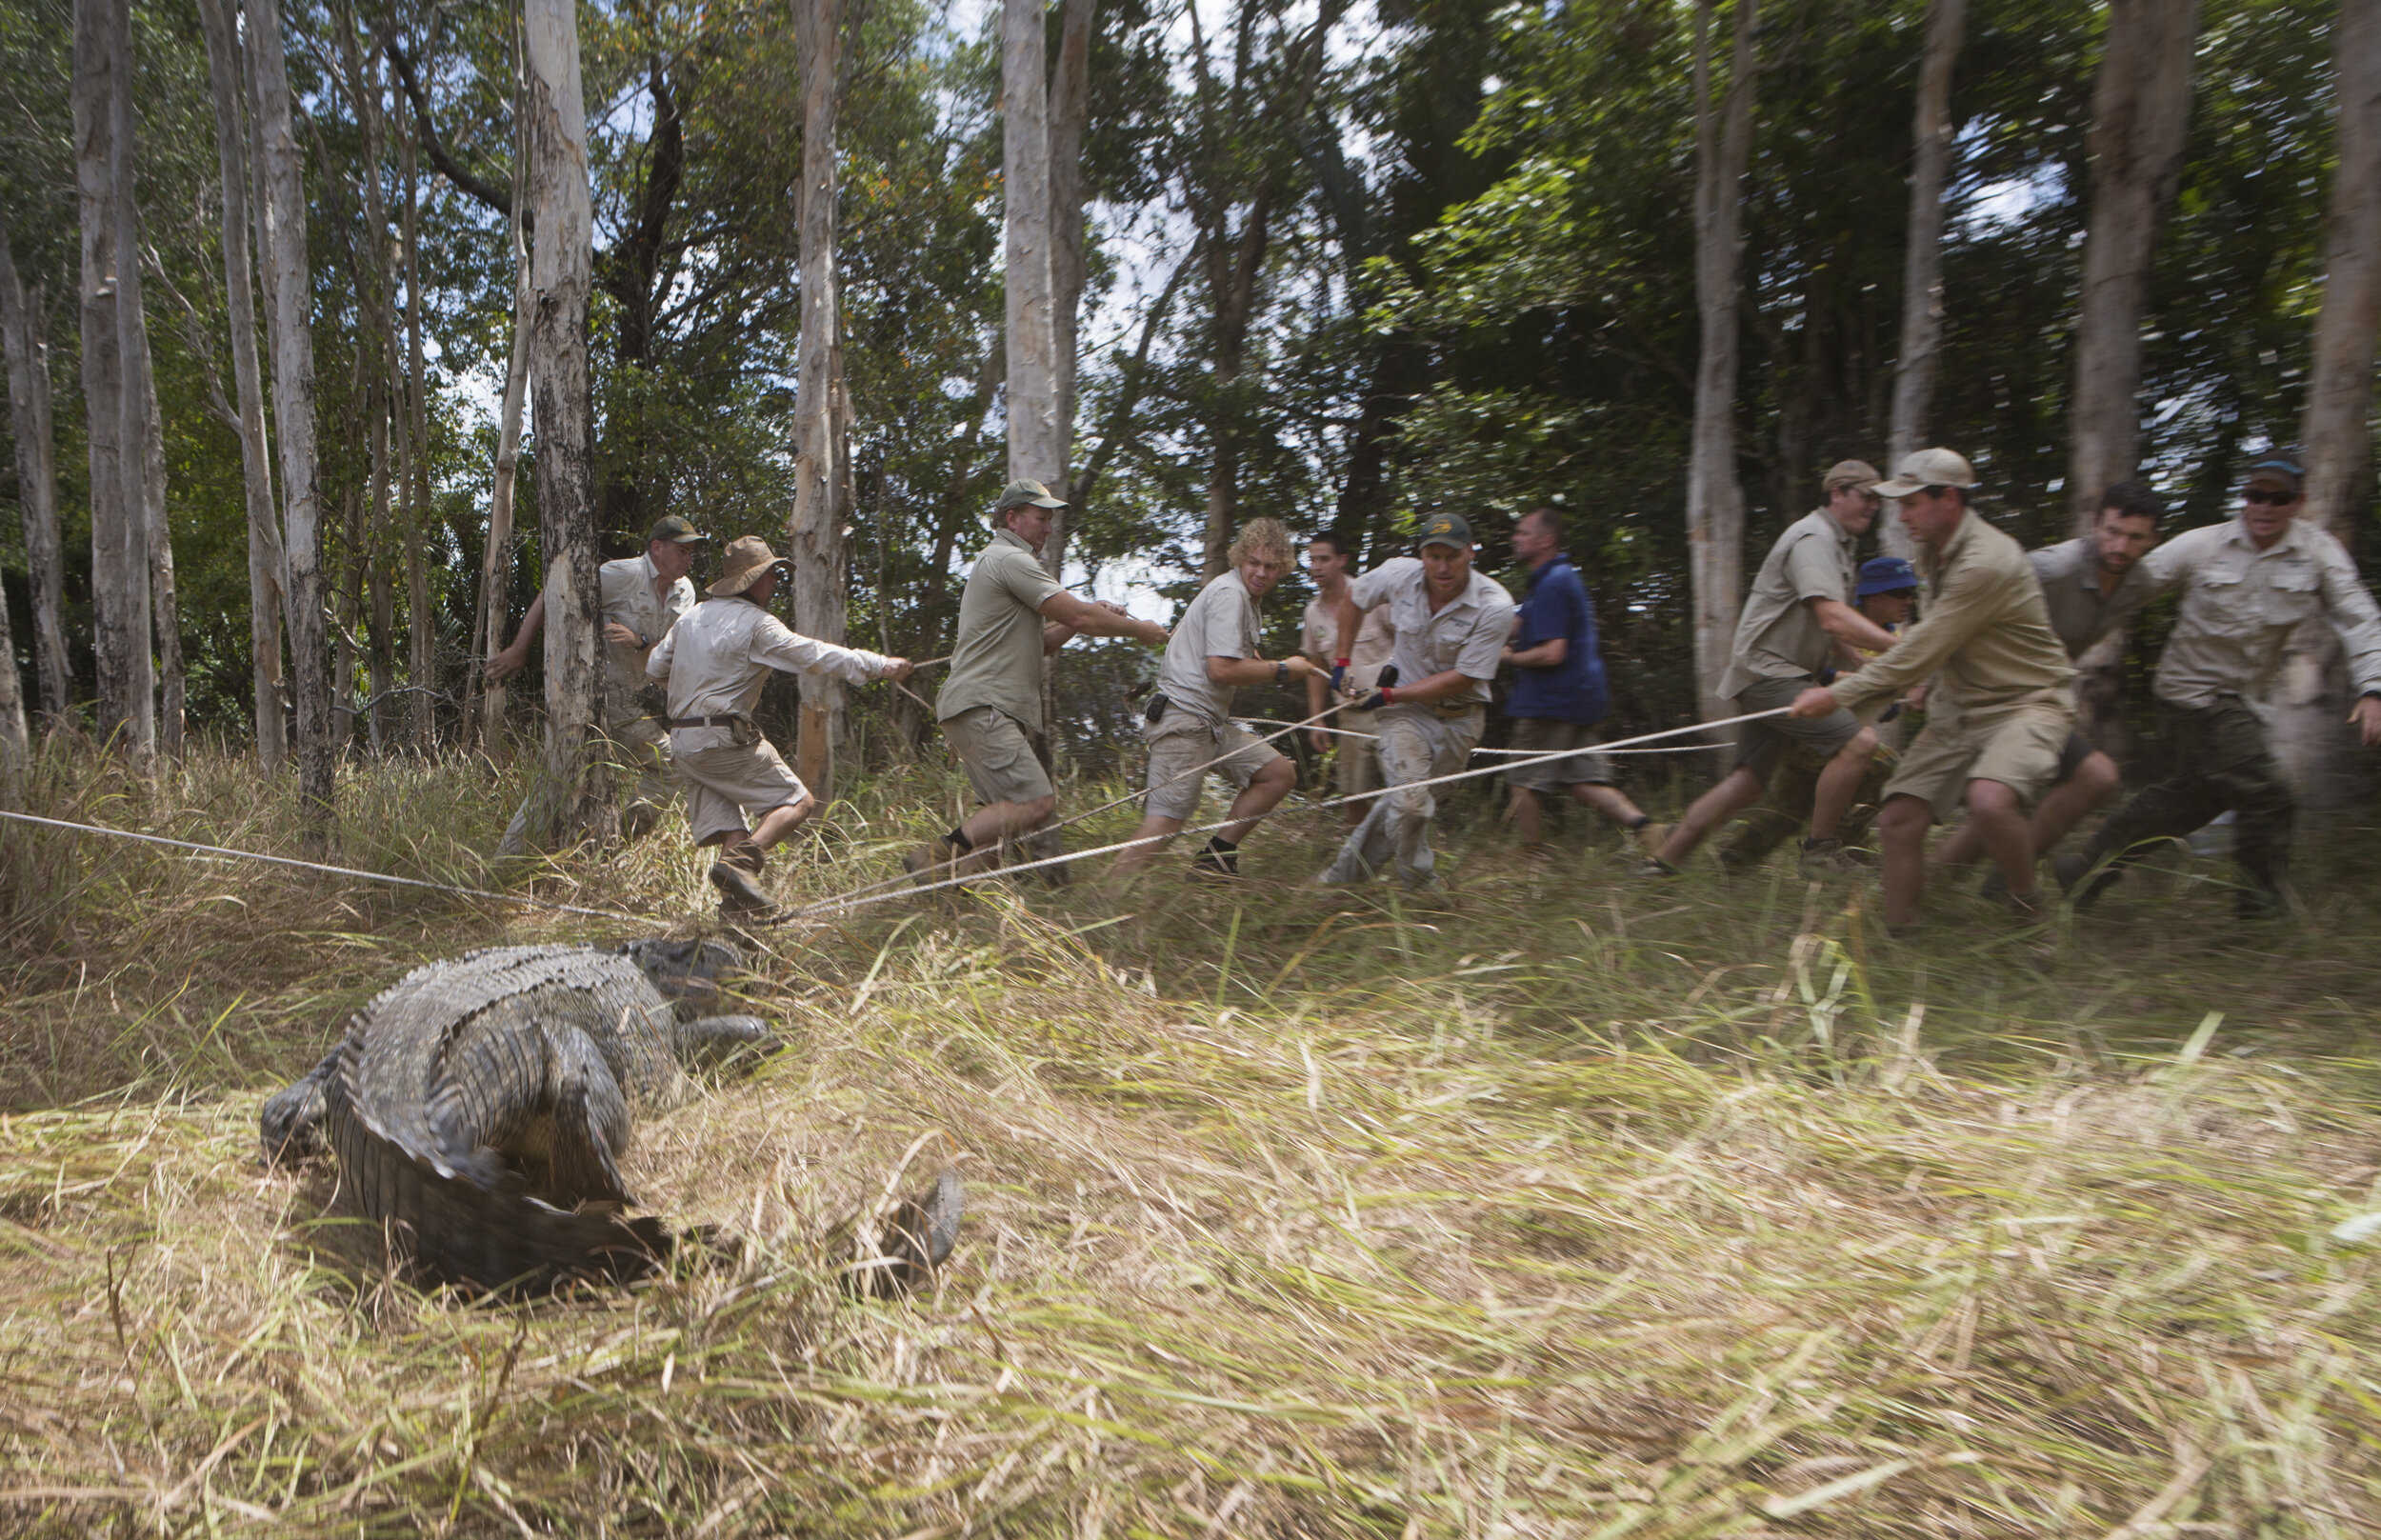  The Capture and release of Jurgen the Crocodile, who was originally captured in 2012 